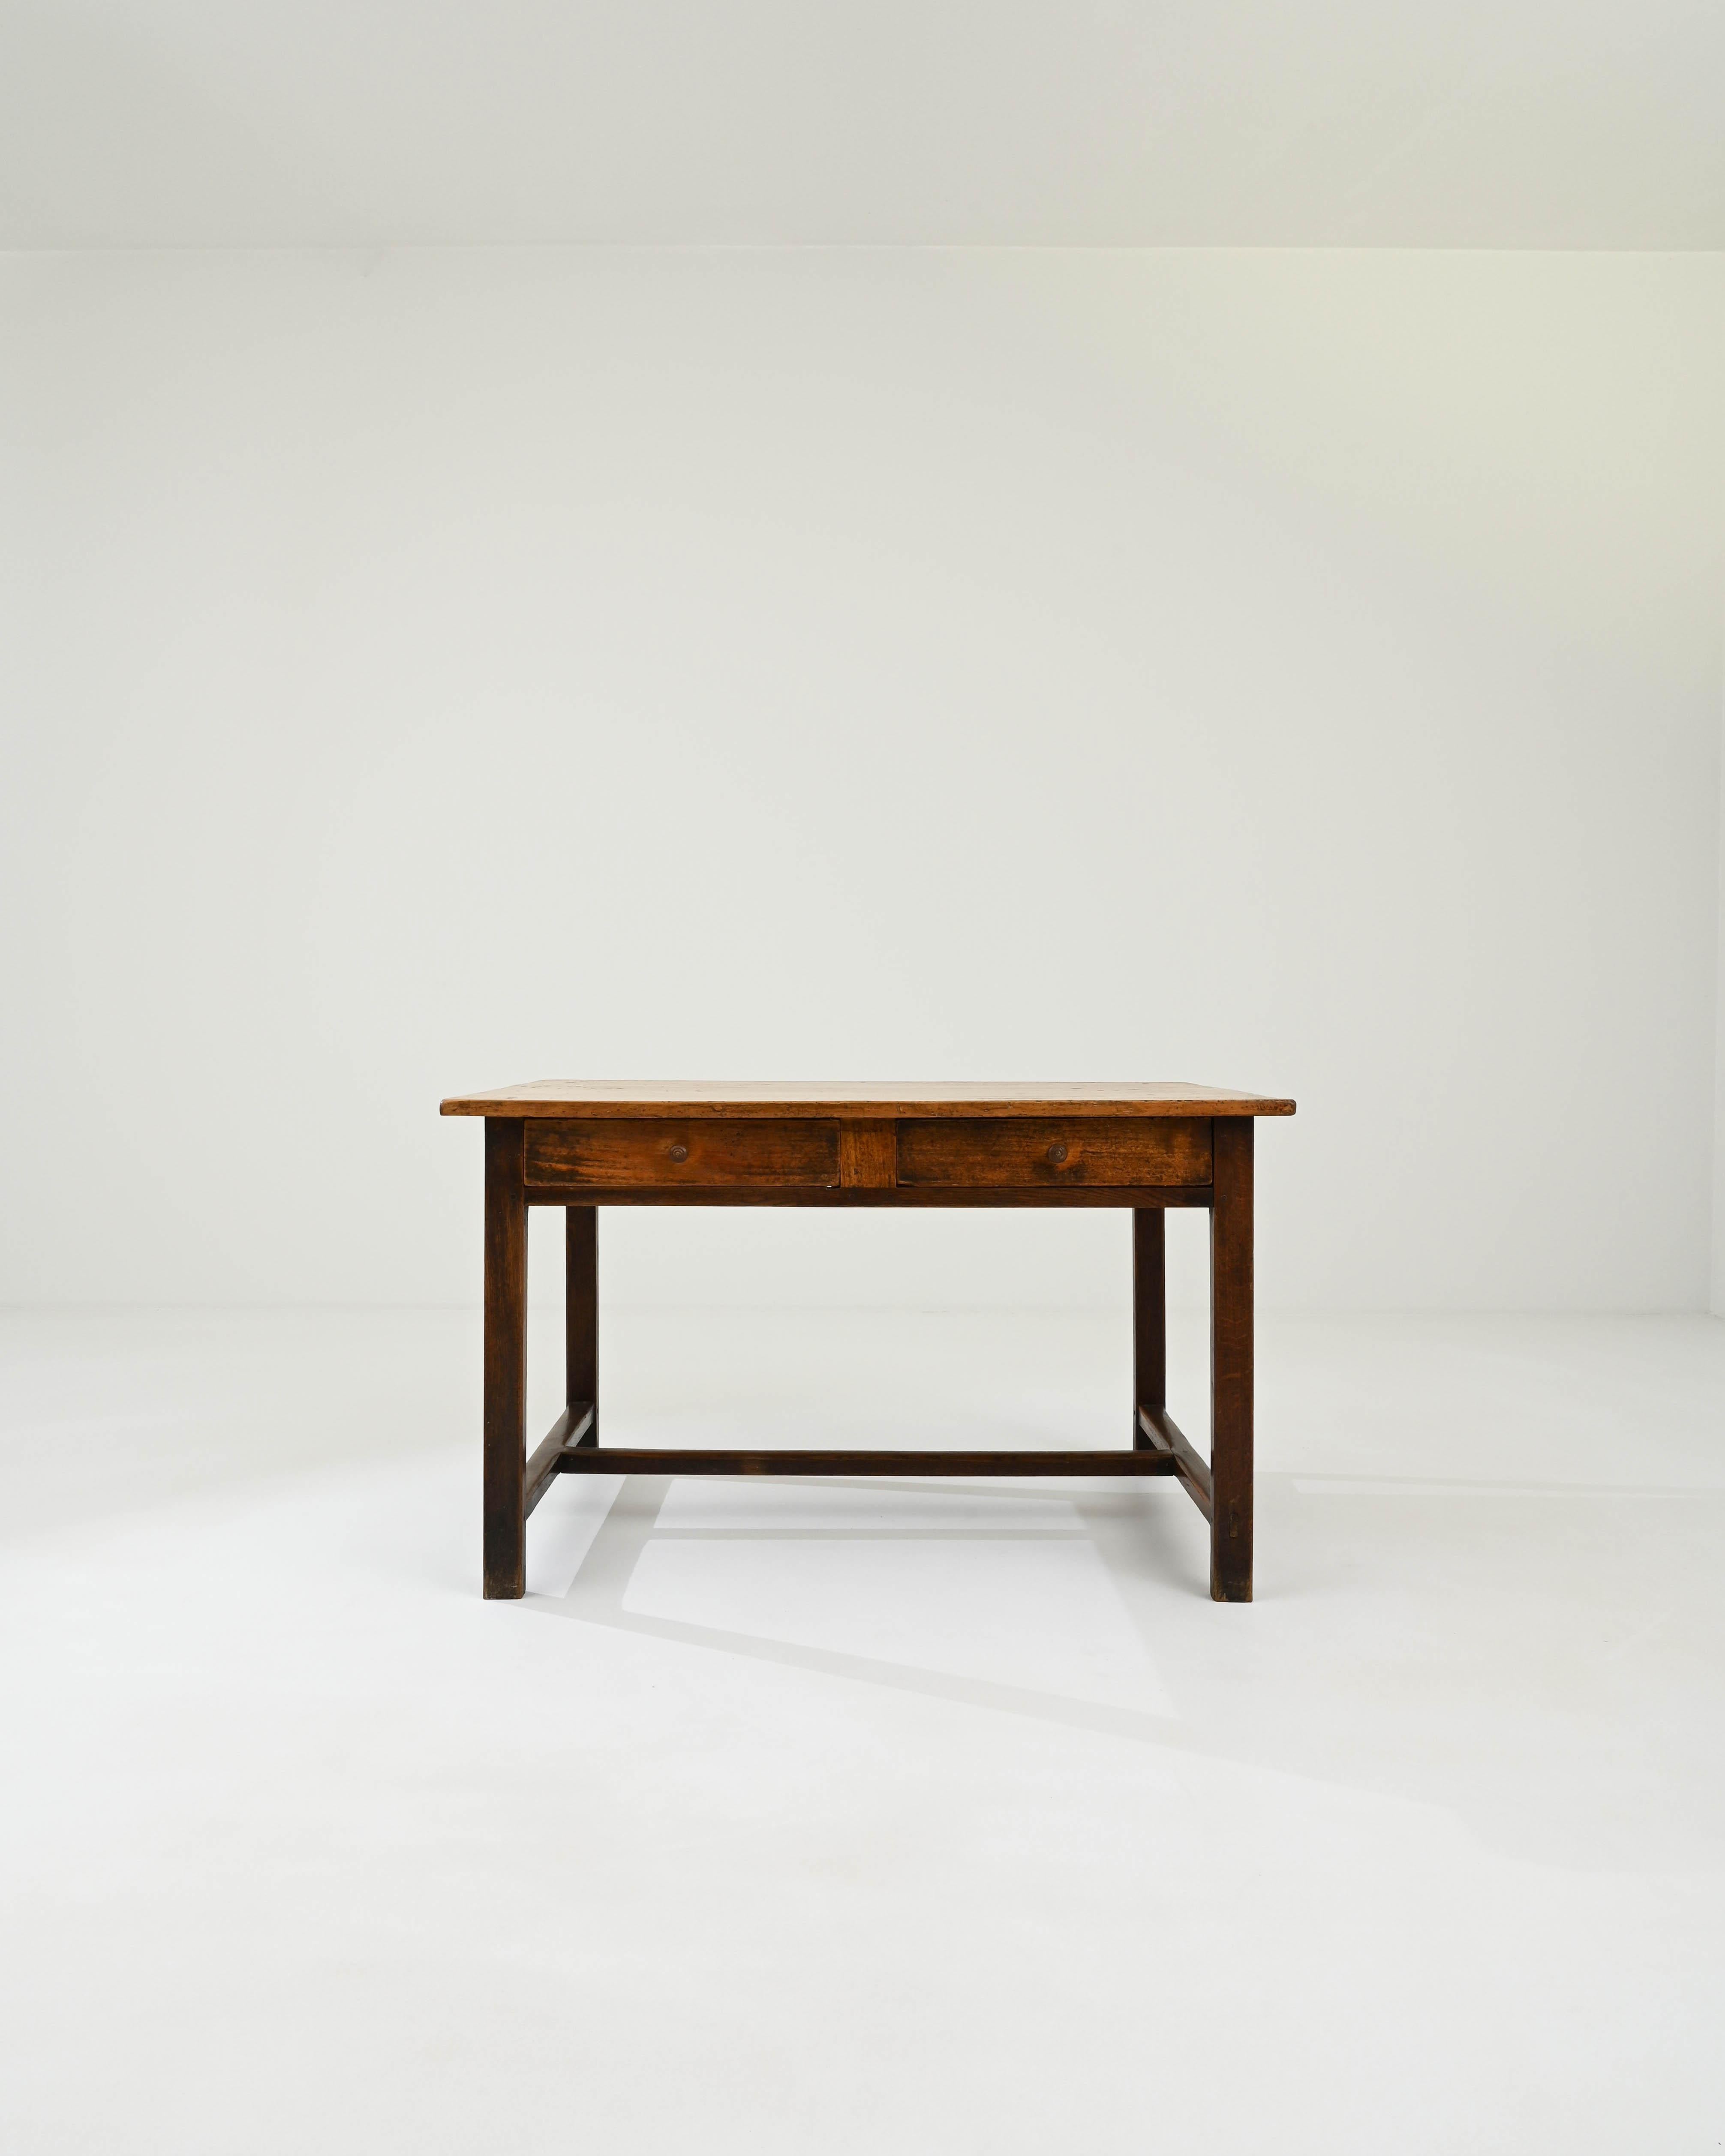 A wooden side table created in 1900s France. Simple, unassuming, and possessing a quiet disposition, the elegantly minimal construction of this side table allows the beauty of its natural materials to shine. Mortise and tenon joinery, an understated